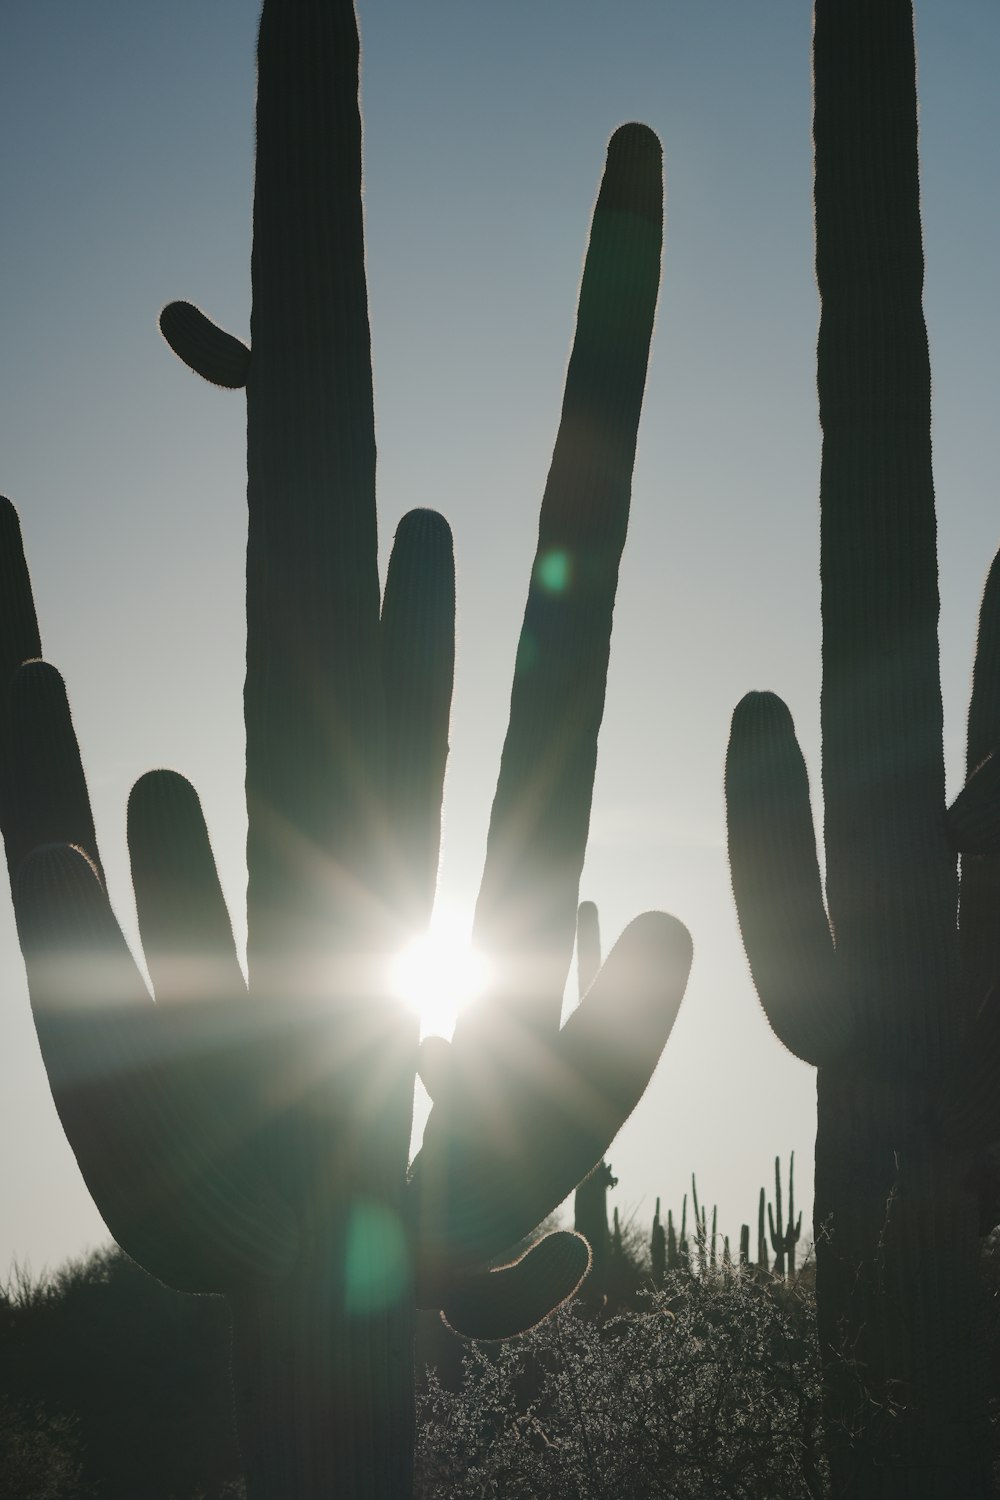 the sun is shining behind a large cactus